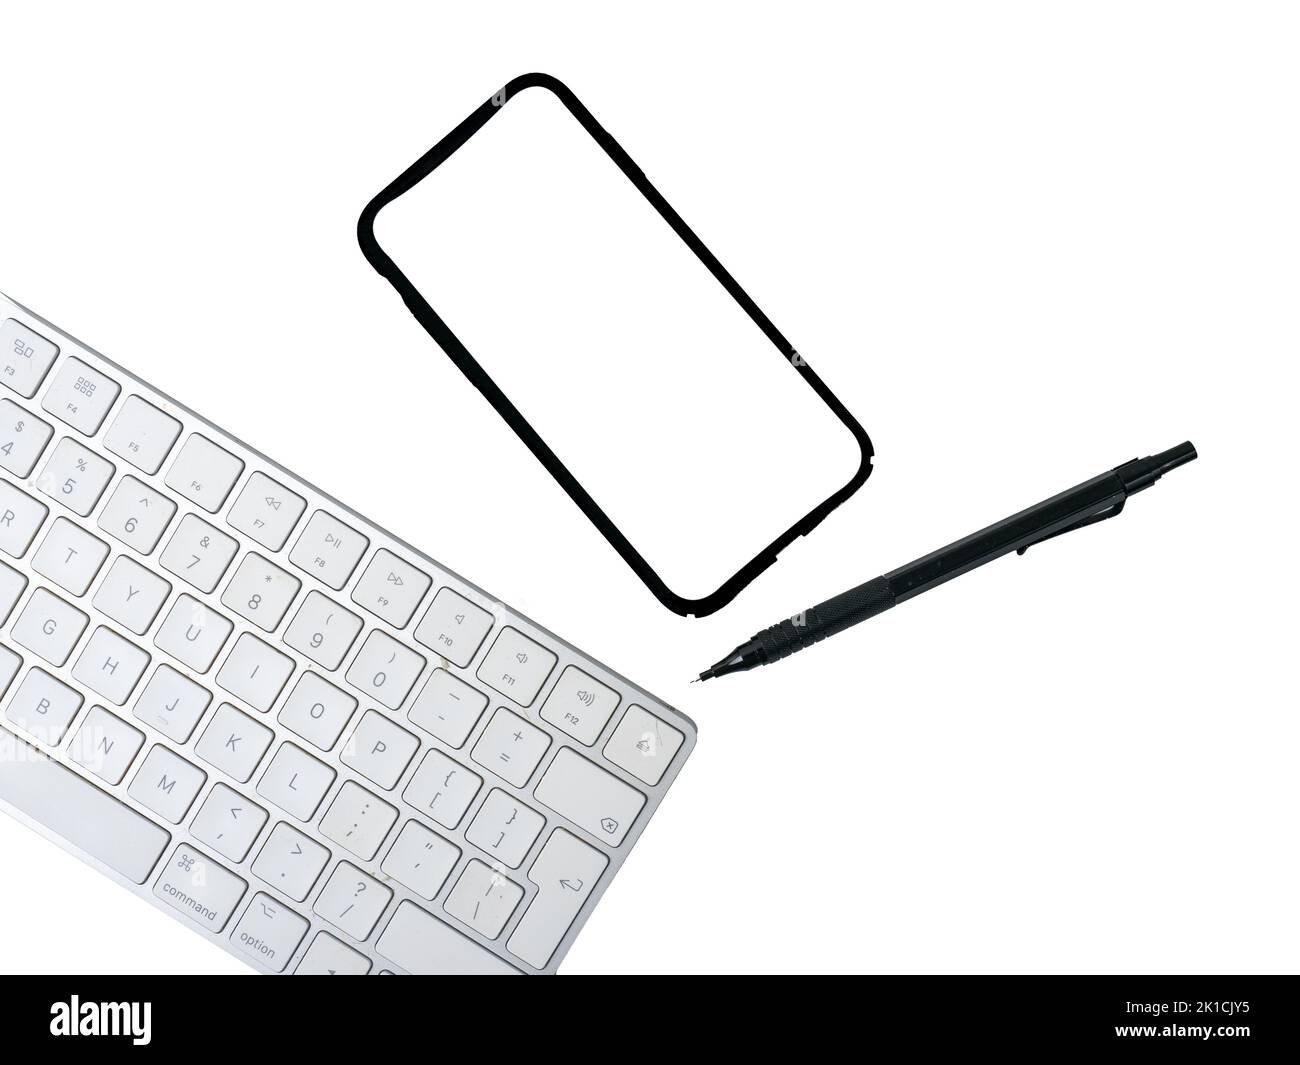 computer keyboard, cell phone and pen isolated on a white background Stock Photo